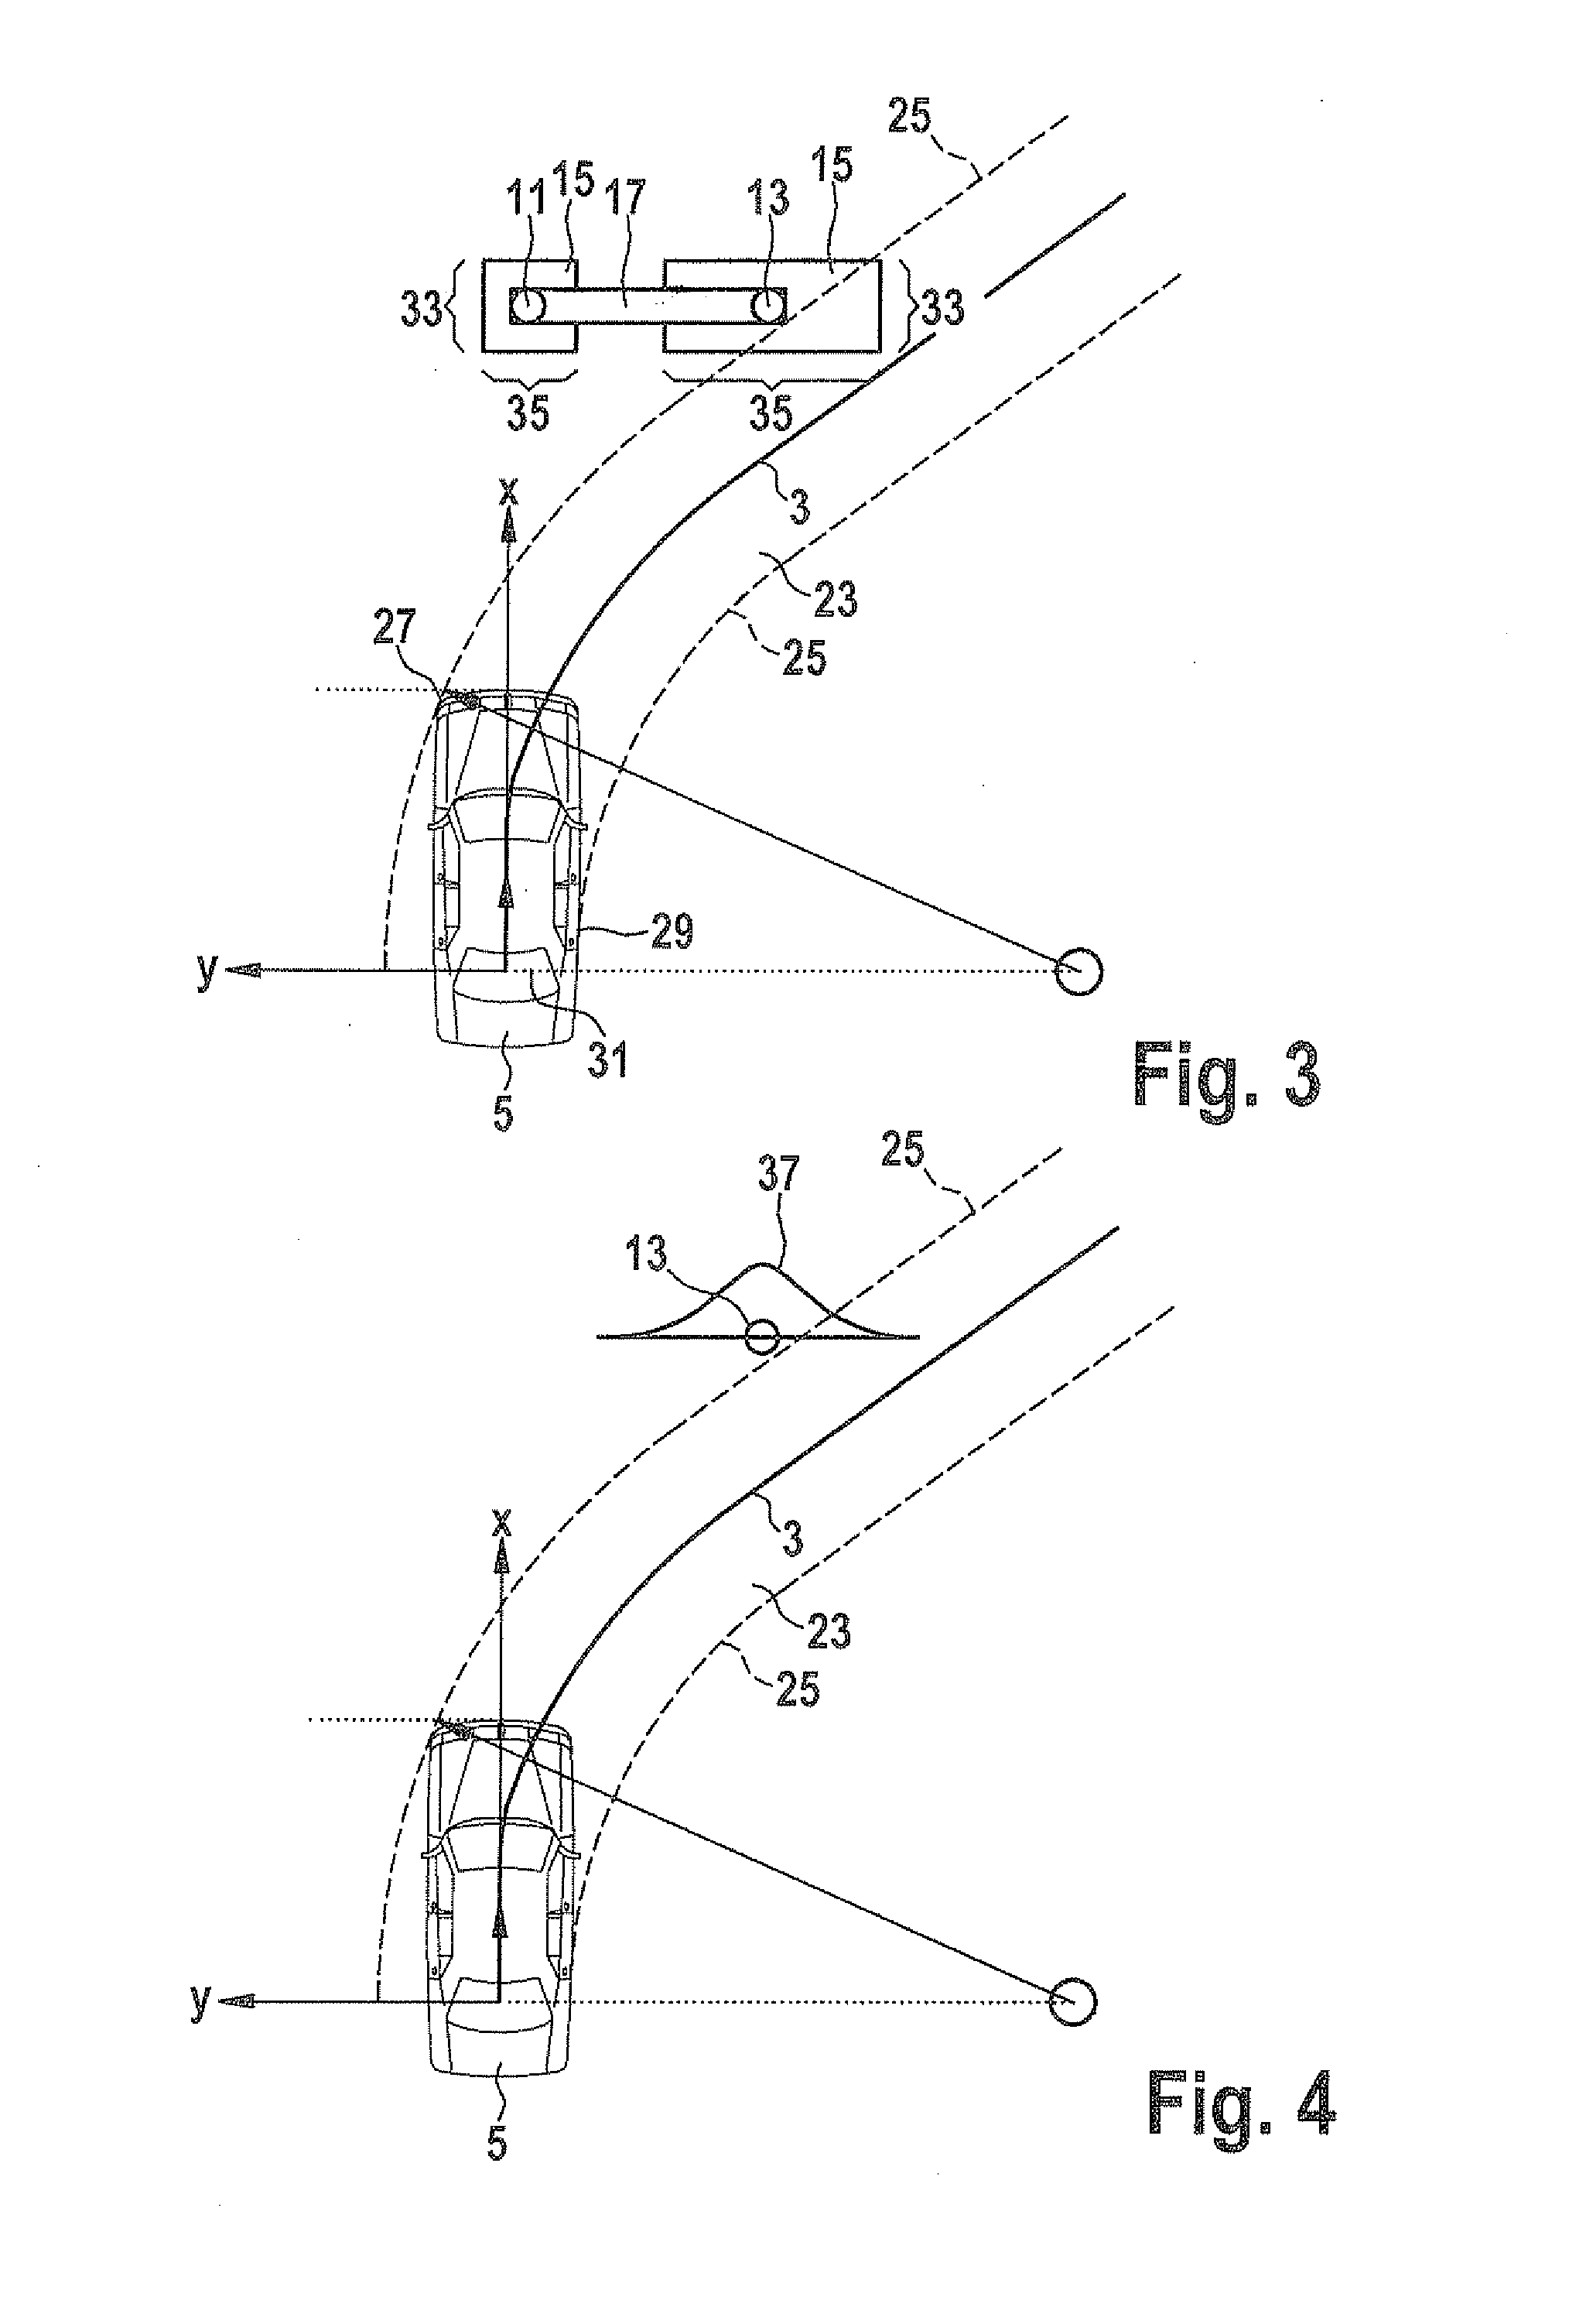 Method for mapping the surroundings of a vehicle